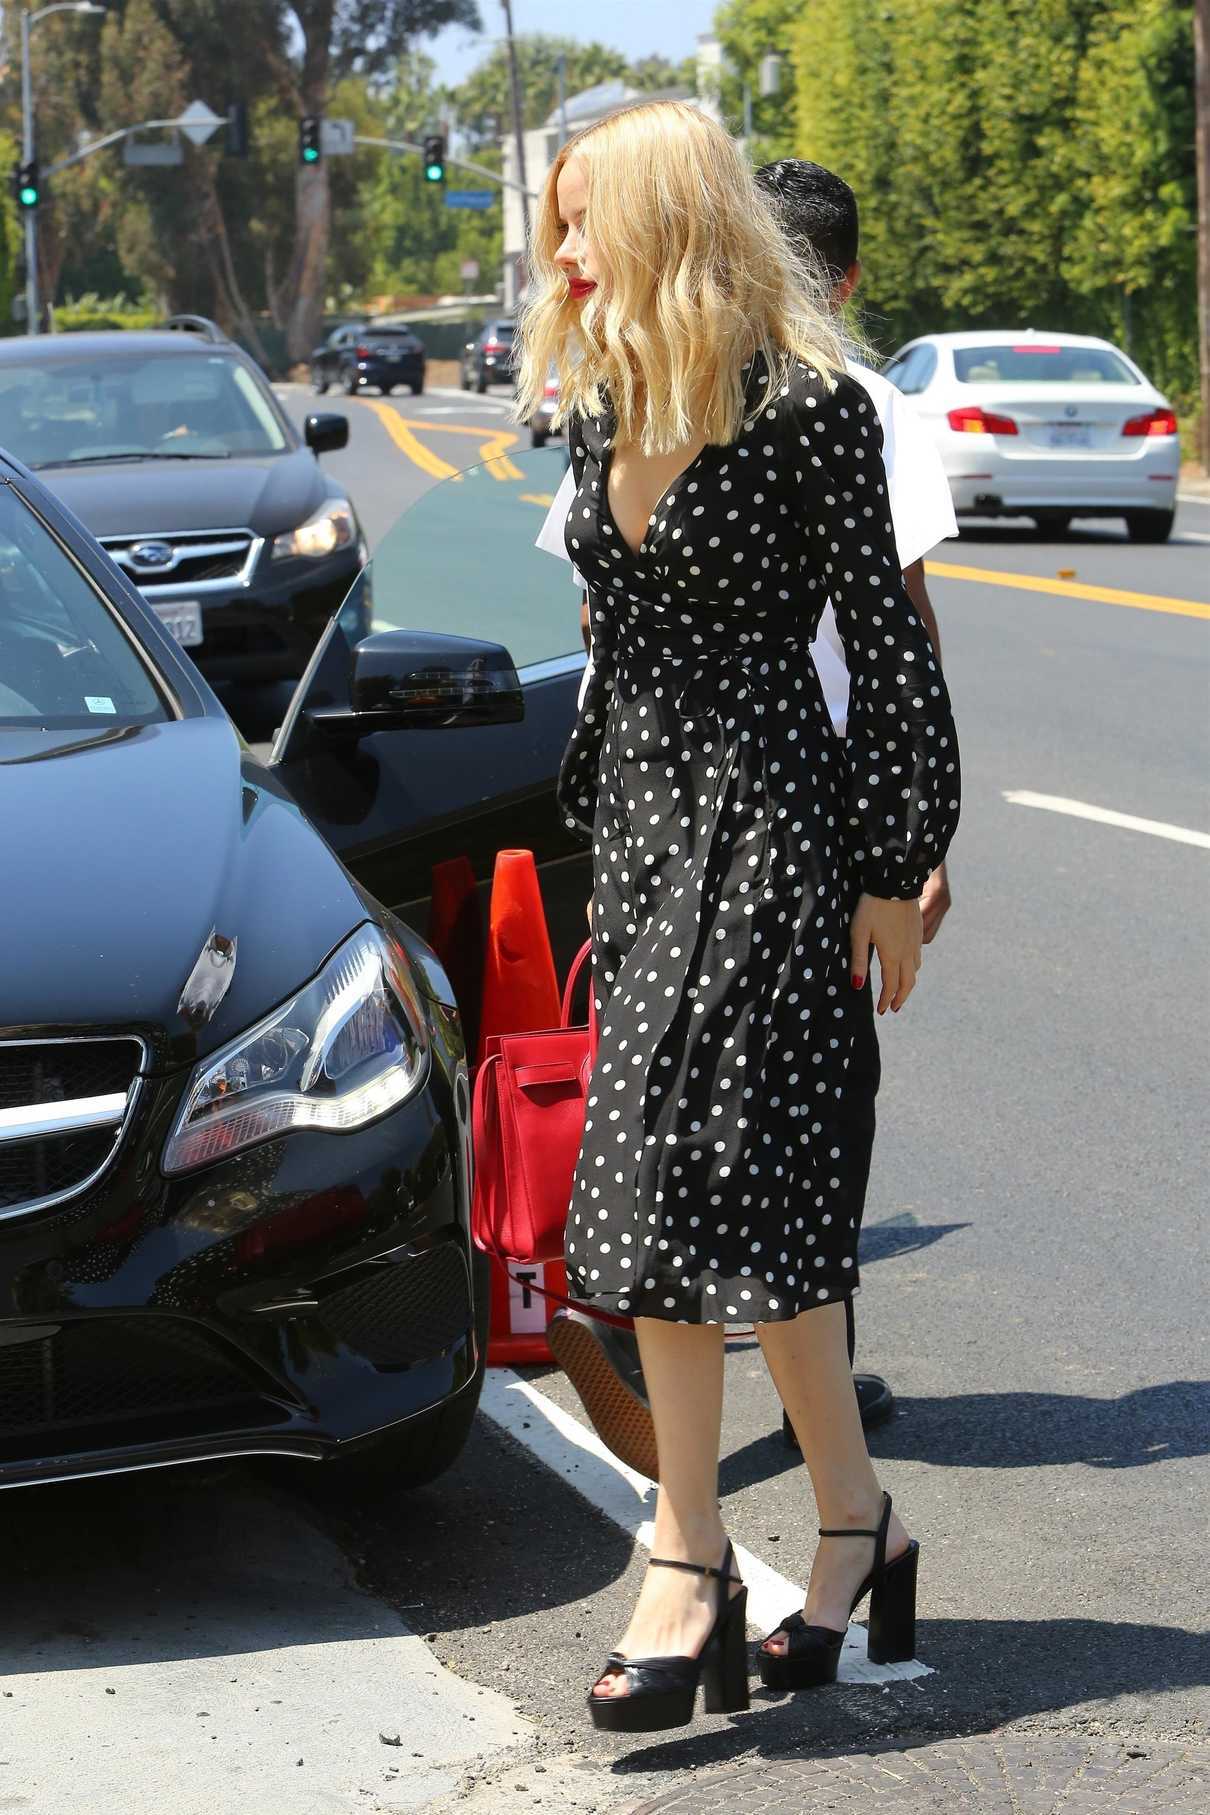 Halston Sage Attends InStyle's Day of Indulgence Party in Brentwood 08/13/2017-4